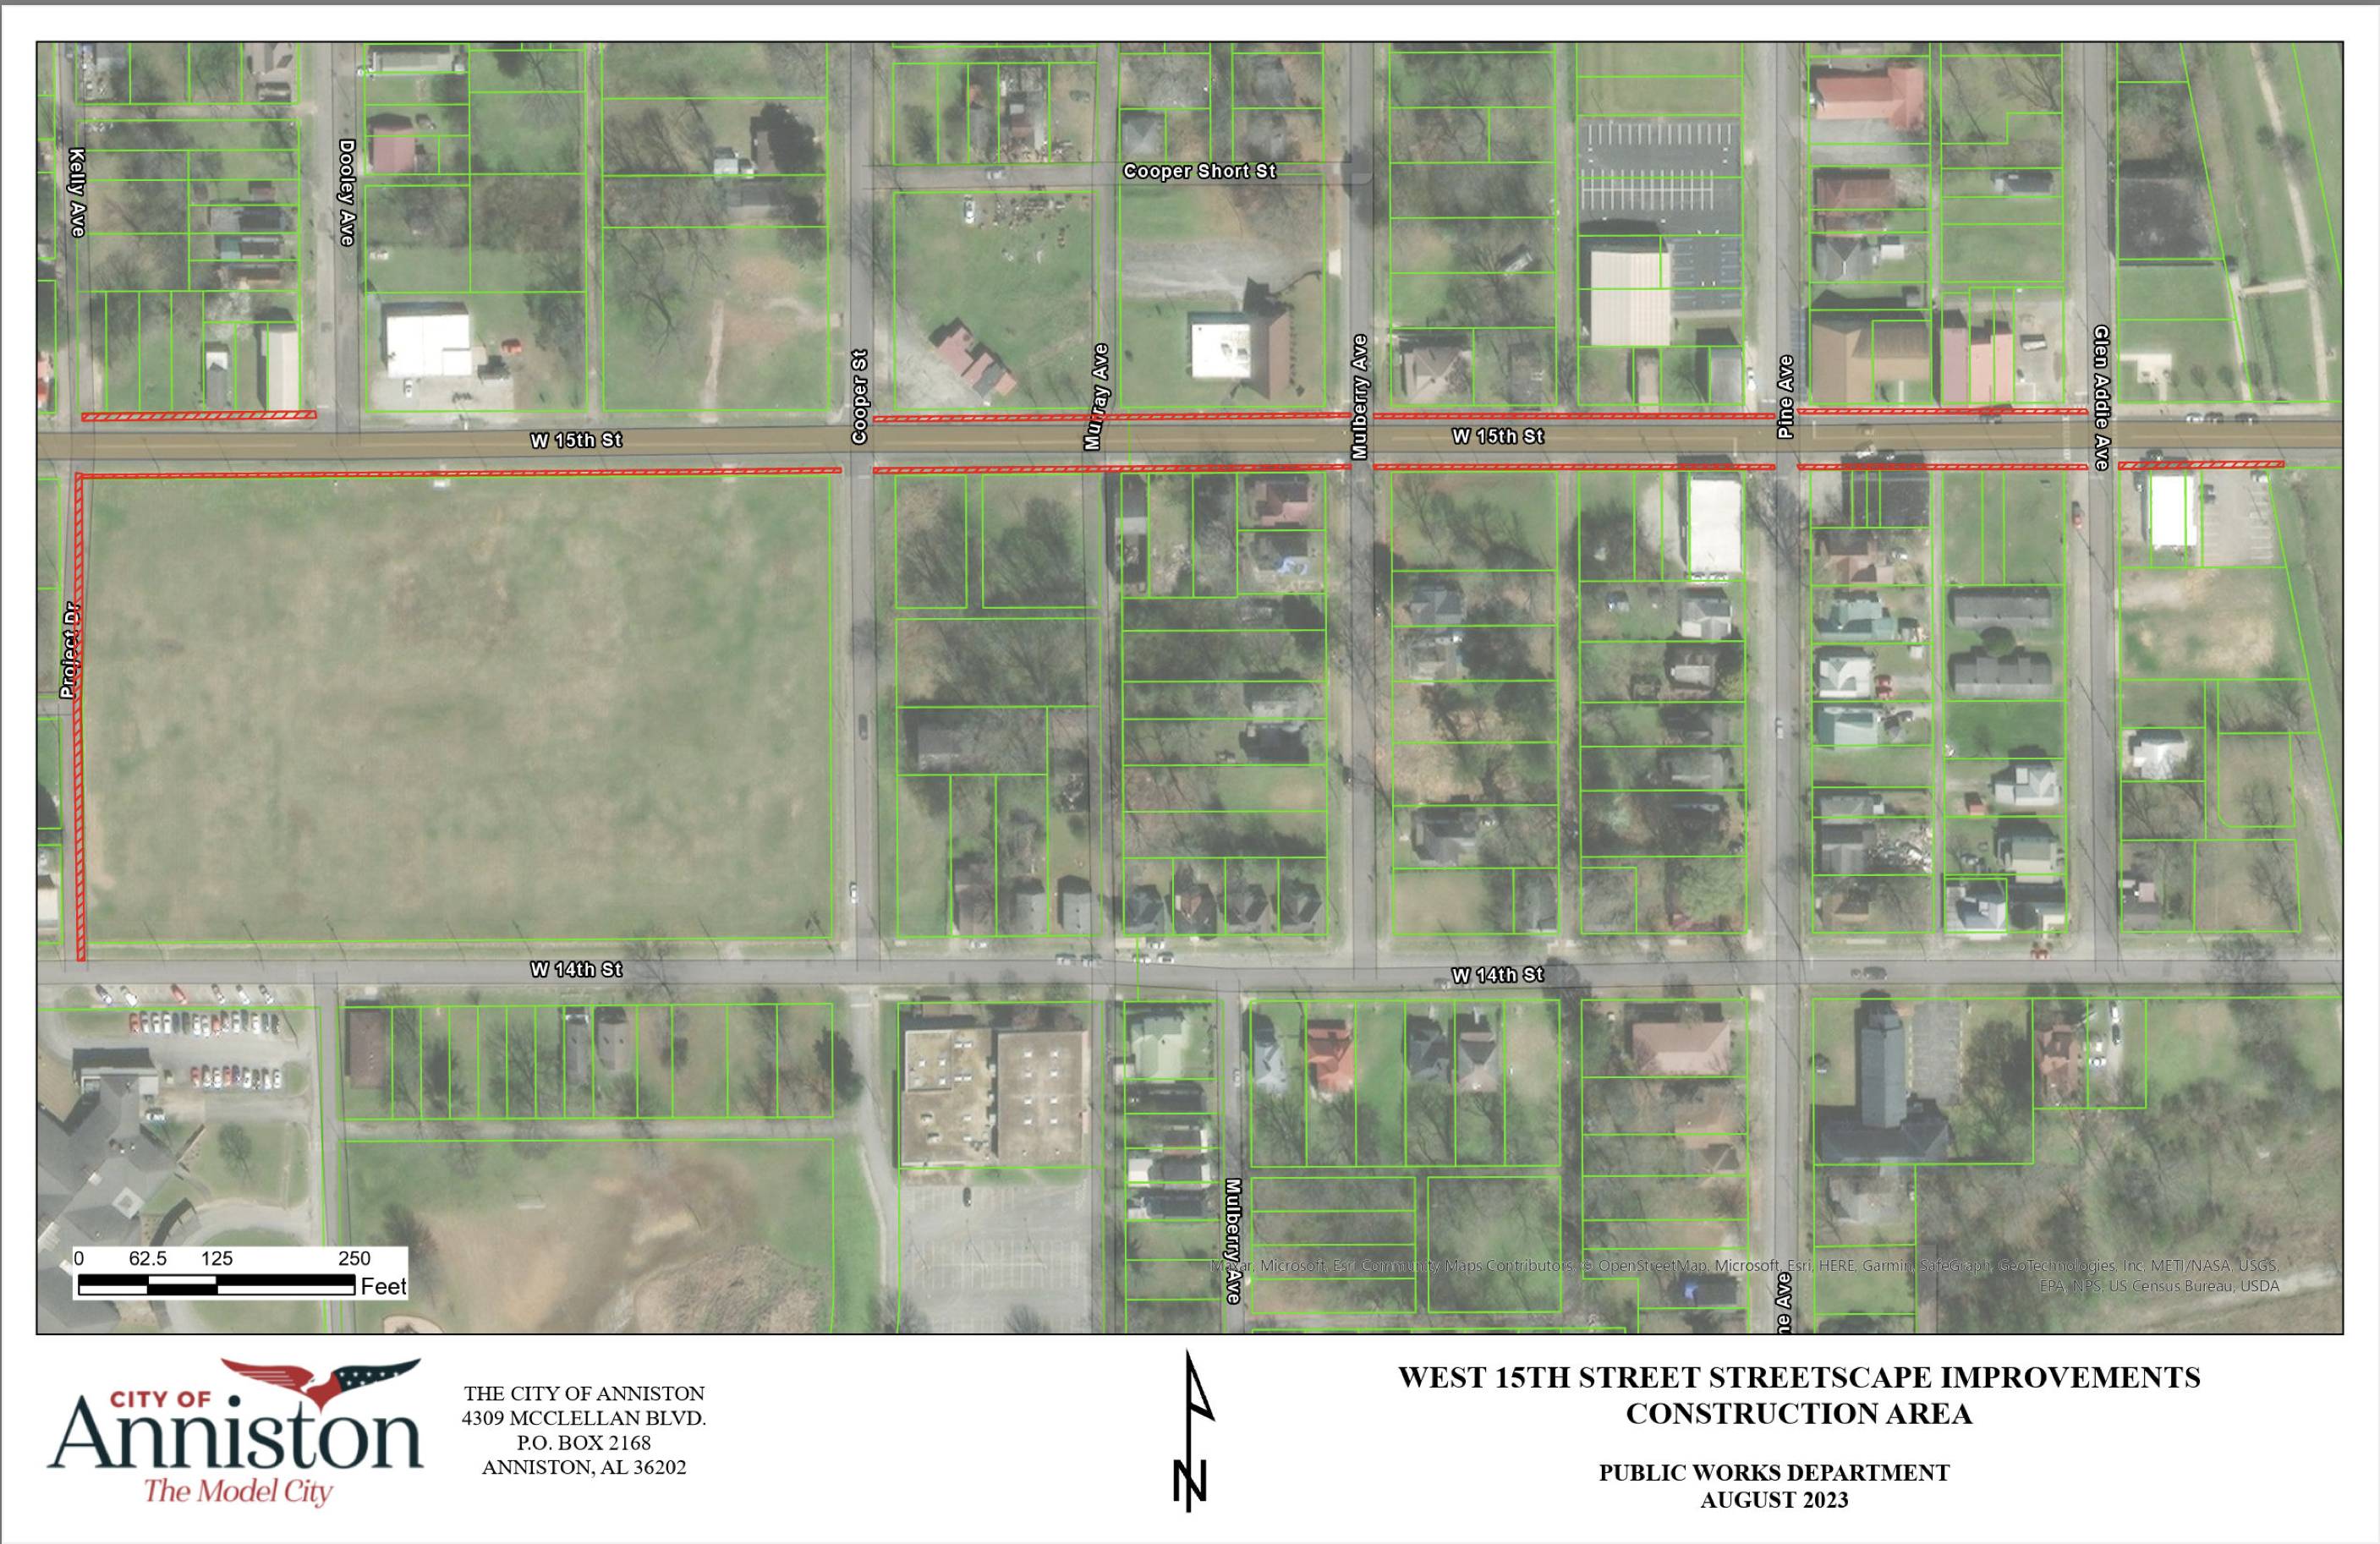 Title: "Anniston's West 15th Street Transformation: Streetscape Project Begins September 18, 2023"